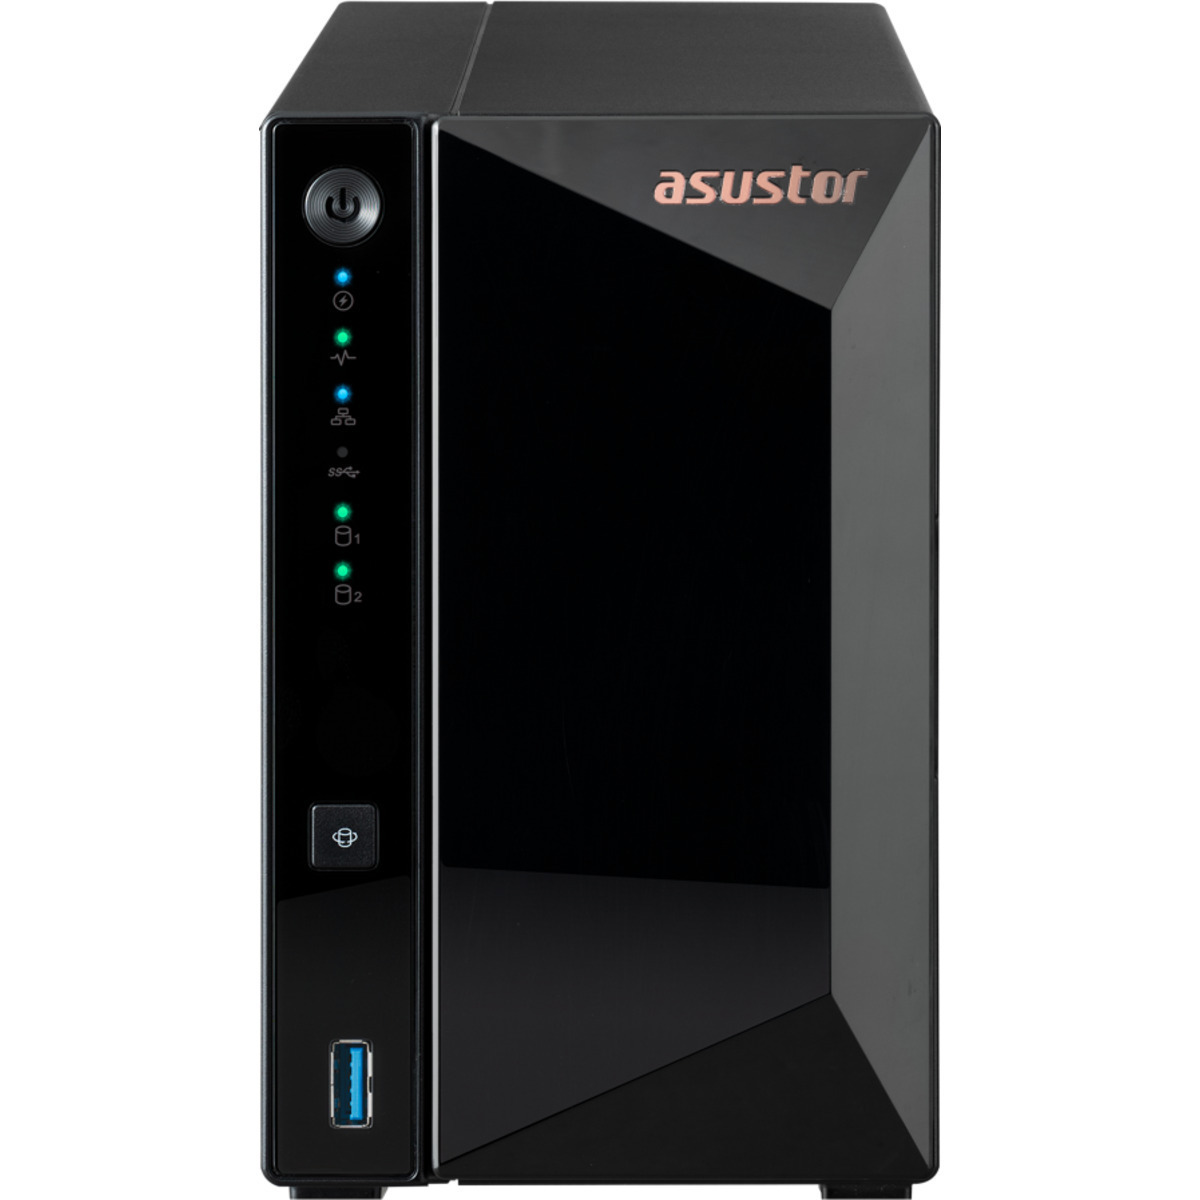 ASUSTOR DRIVESTOR 2 Pro AS3302T 8tb 2-Bay Desktop Personal / Basic Home / Small Office NAS - Network Attached Storage Device 2x4tb Western Digital Red Plus WD40EFPX 3.5 5400rpm SATA 6Gb/s HDD NAS Class Drives Installed - Burn-In Tested DRIVESTOR 2 Pro AS3302T